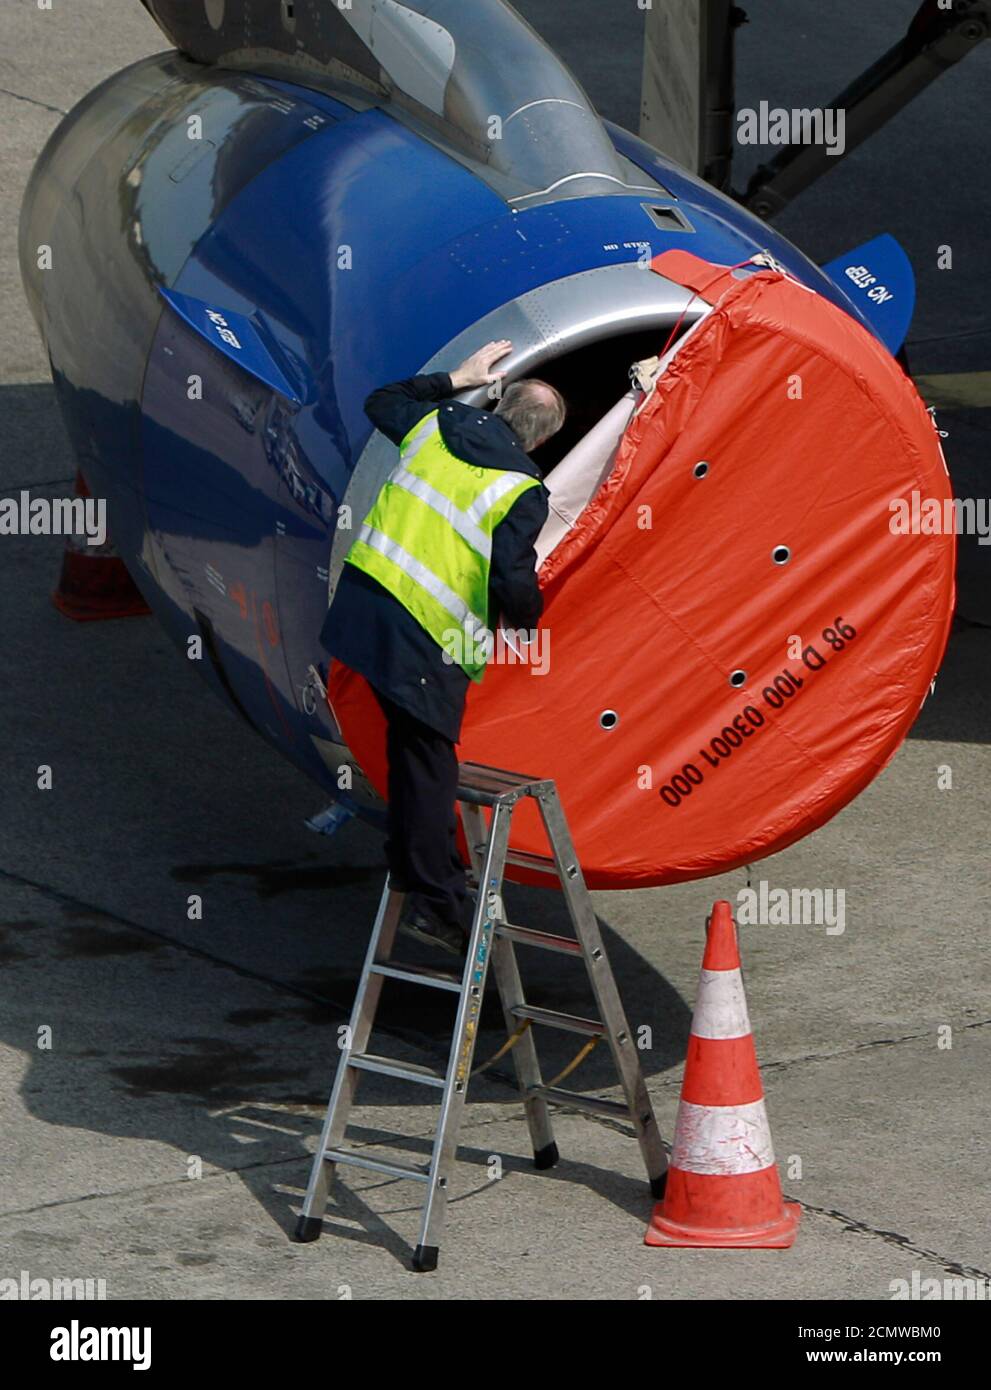 A worker removes a turbine cover at a British Airways plane at Berlin's Tegel airport April 20, 2010.  European airports made tentative steps toward resuming flights on Tuesday after five days cut off from global air traffic by a huge ash cloud, but much airspace stayed closed after reports of a new plume. REUTERS/Thomas Peter (GERMANY - Tags: TRANSPORT) Stock Photo